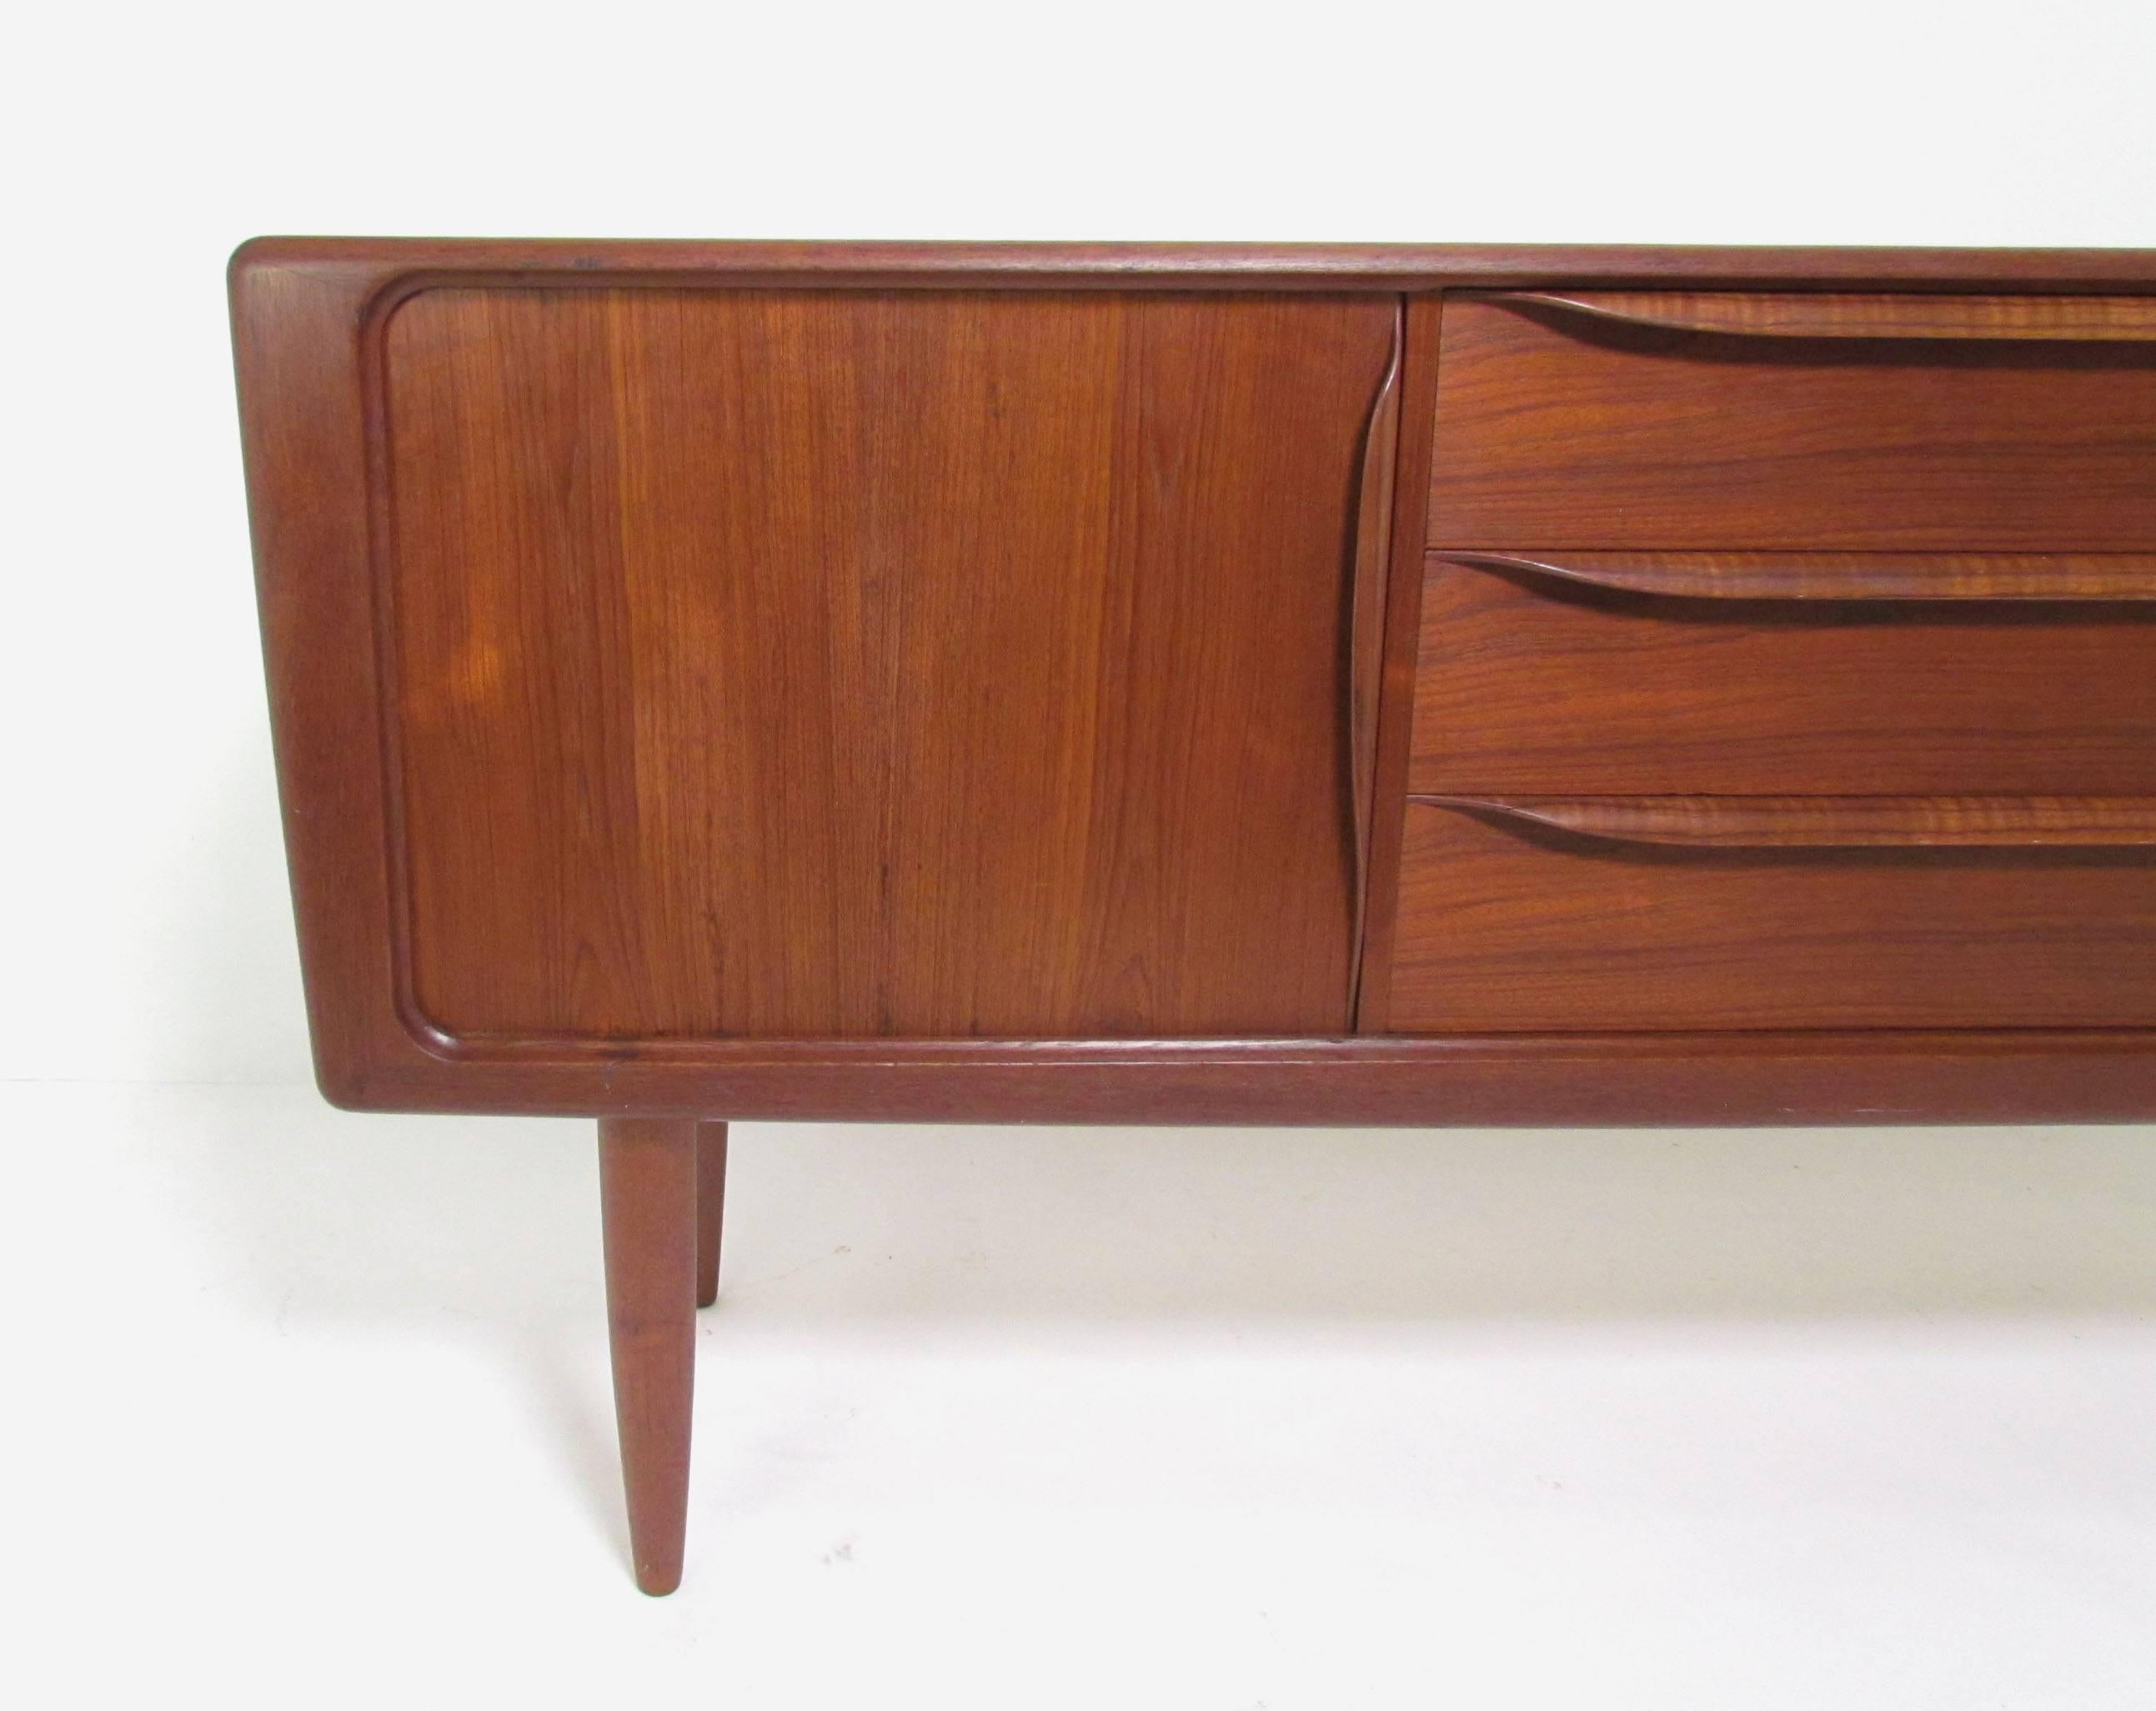 Exceptional Danish teak sideboard with tambour doors and middle section of storage drawers, designed for the Copenagen fine furniture store Hos Wulff, circa 1960s, in the manner of Bernhard Pederson & Son designs for the shop. Contoured